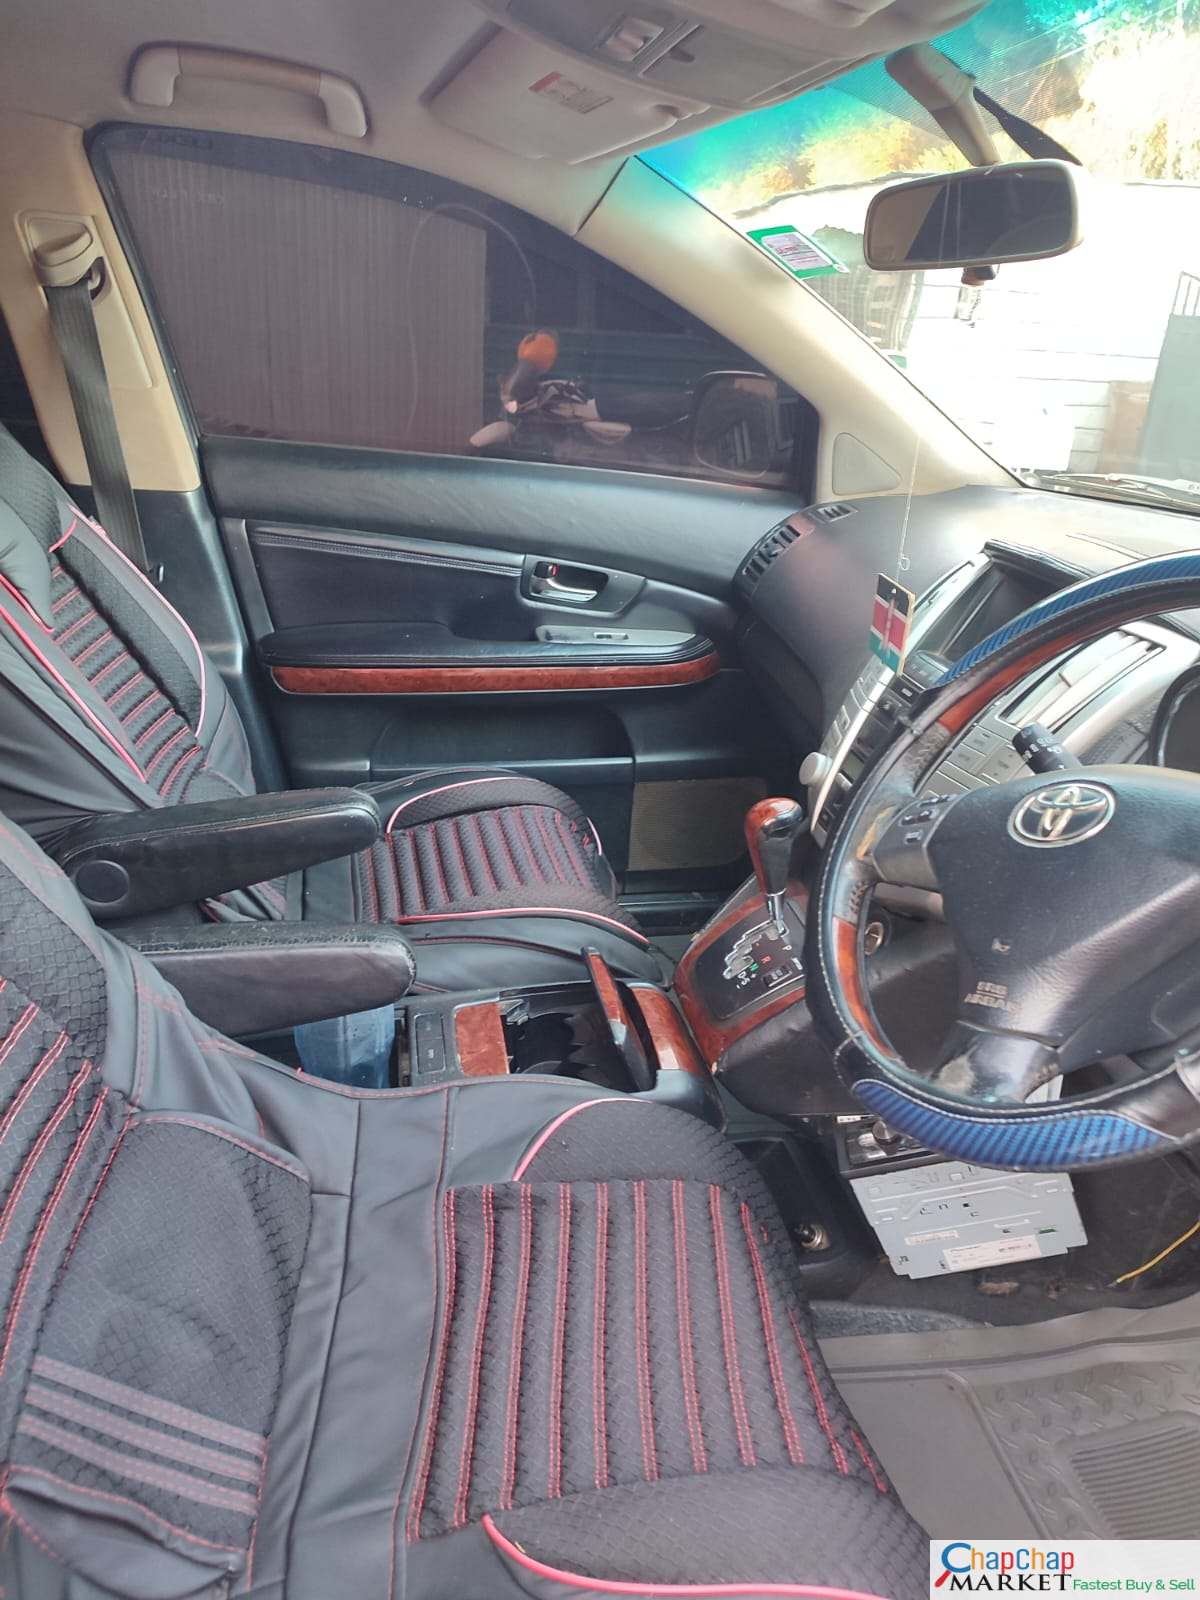 Toyota Harrier kenya 620K ONLY You Pay 30% Deposit Trade in OK harrier for sale in kenya hire purchase installments EXCLUSIVE